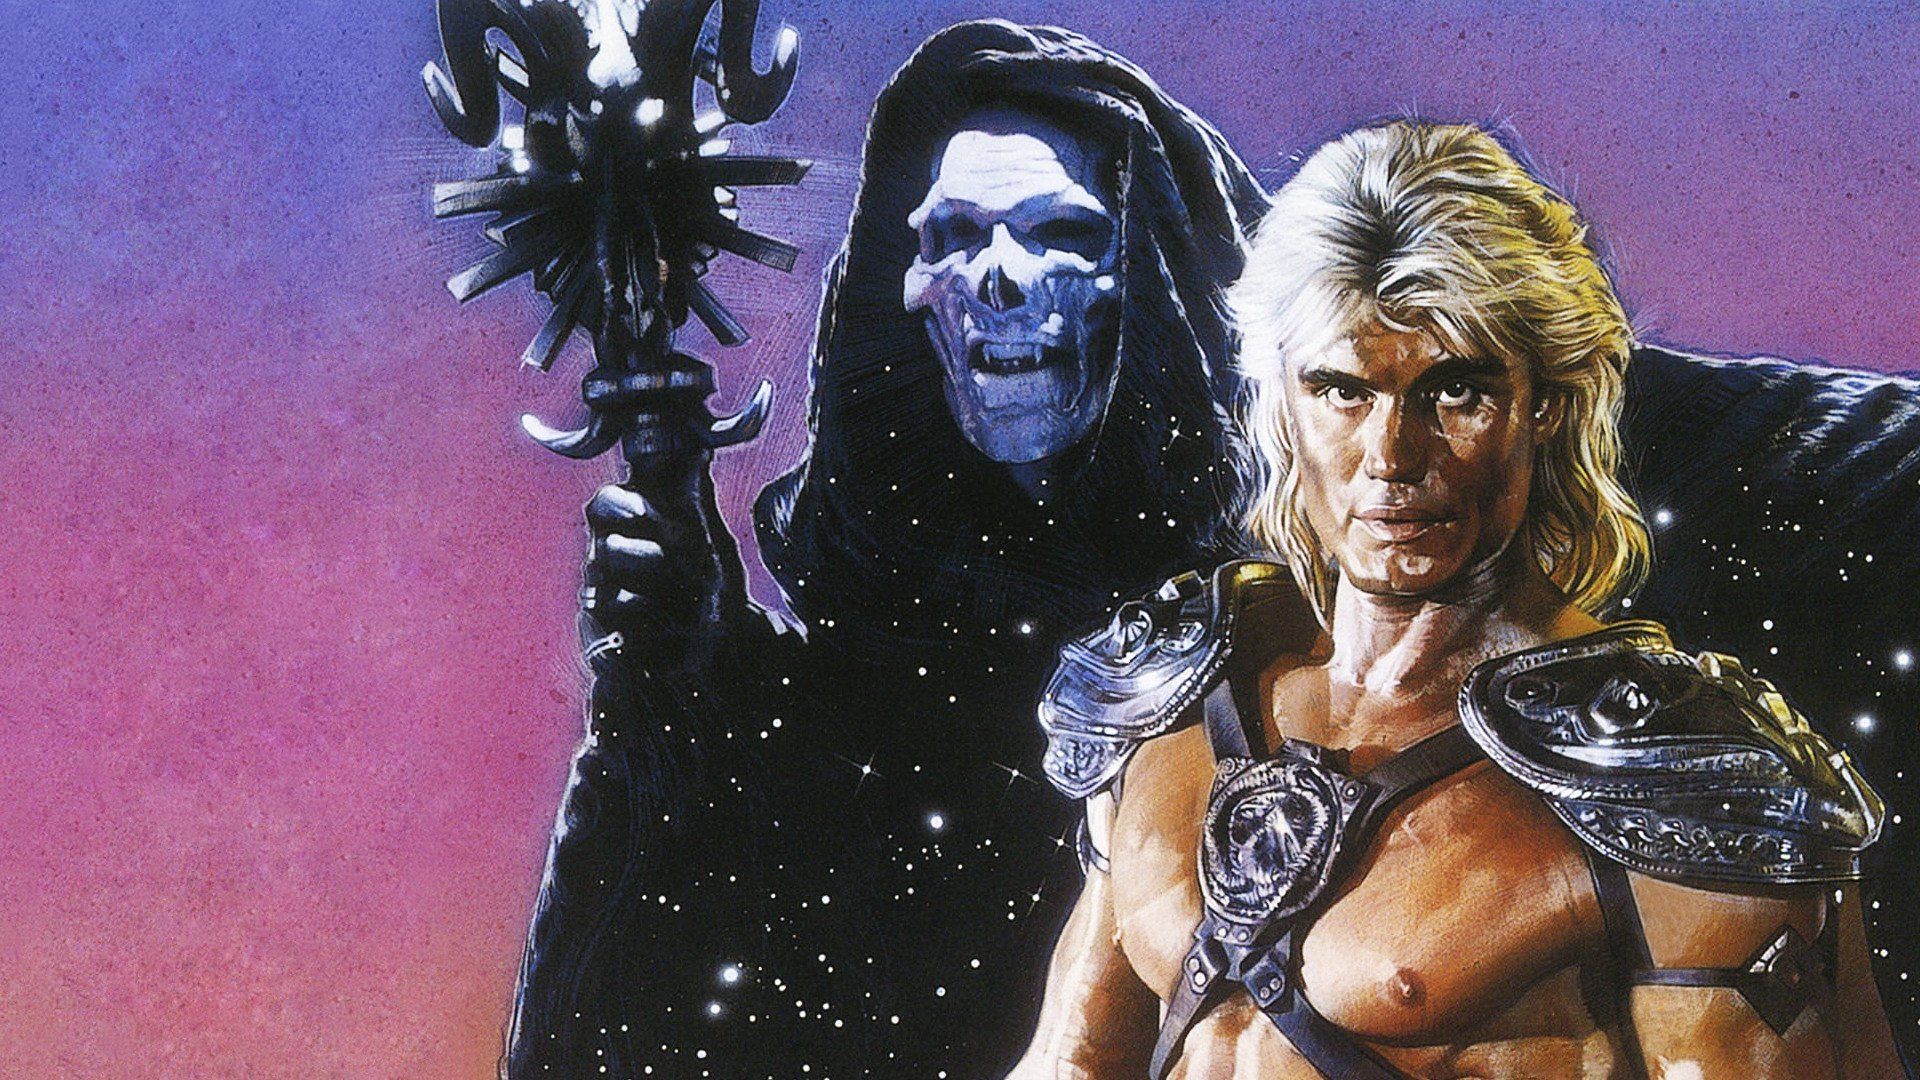 Masters of the Universe with Dolph Lundgren as He-man (Image via Den of Geek)